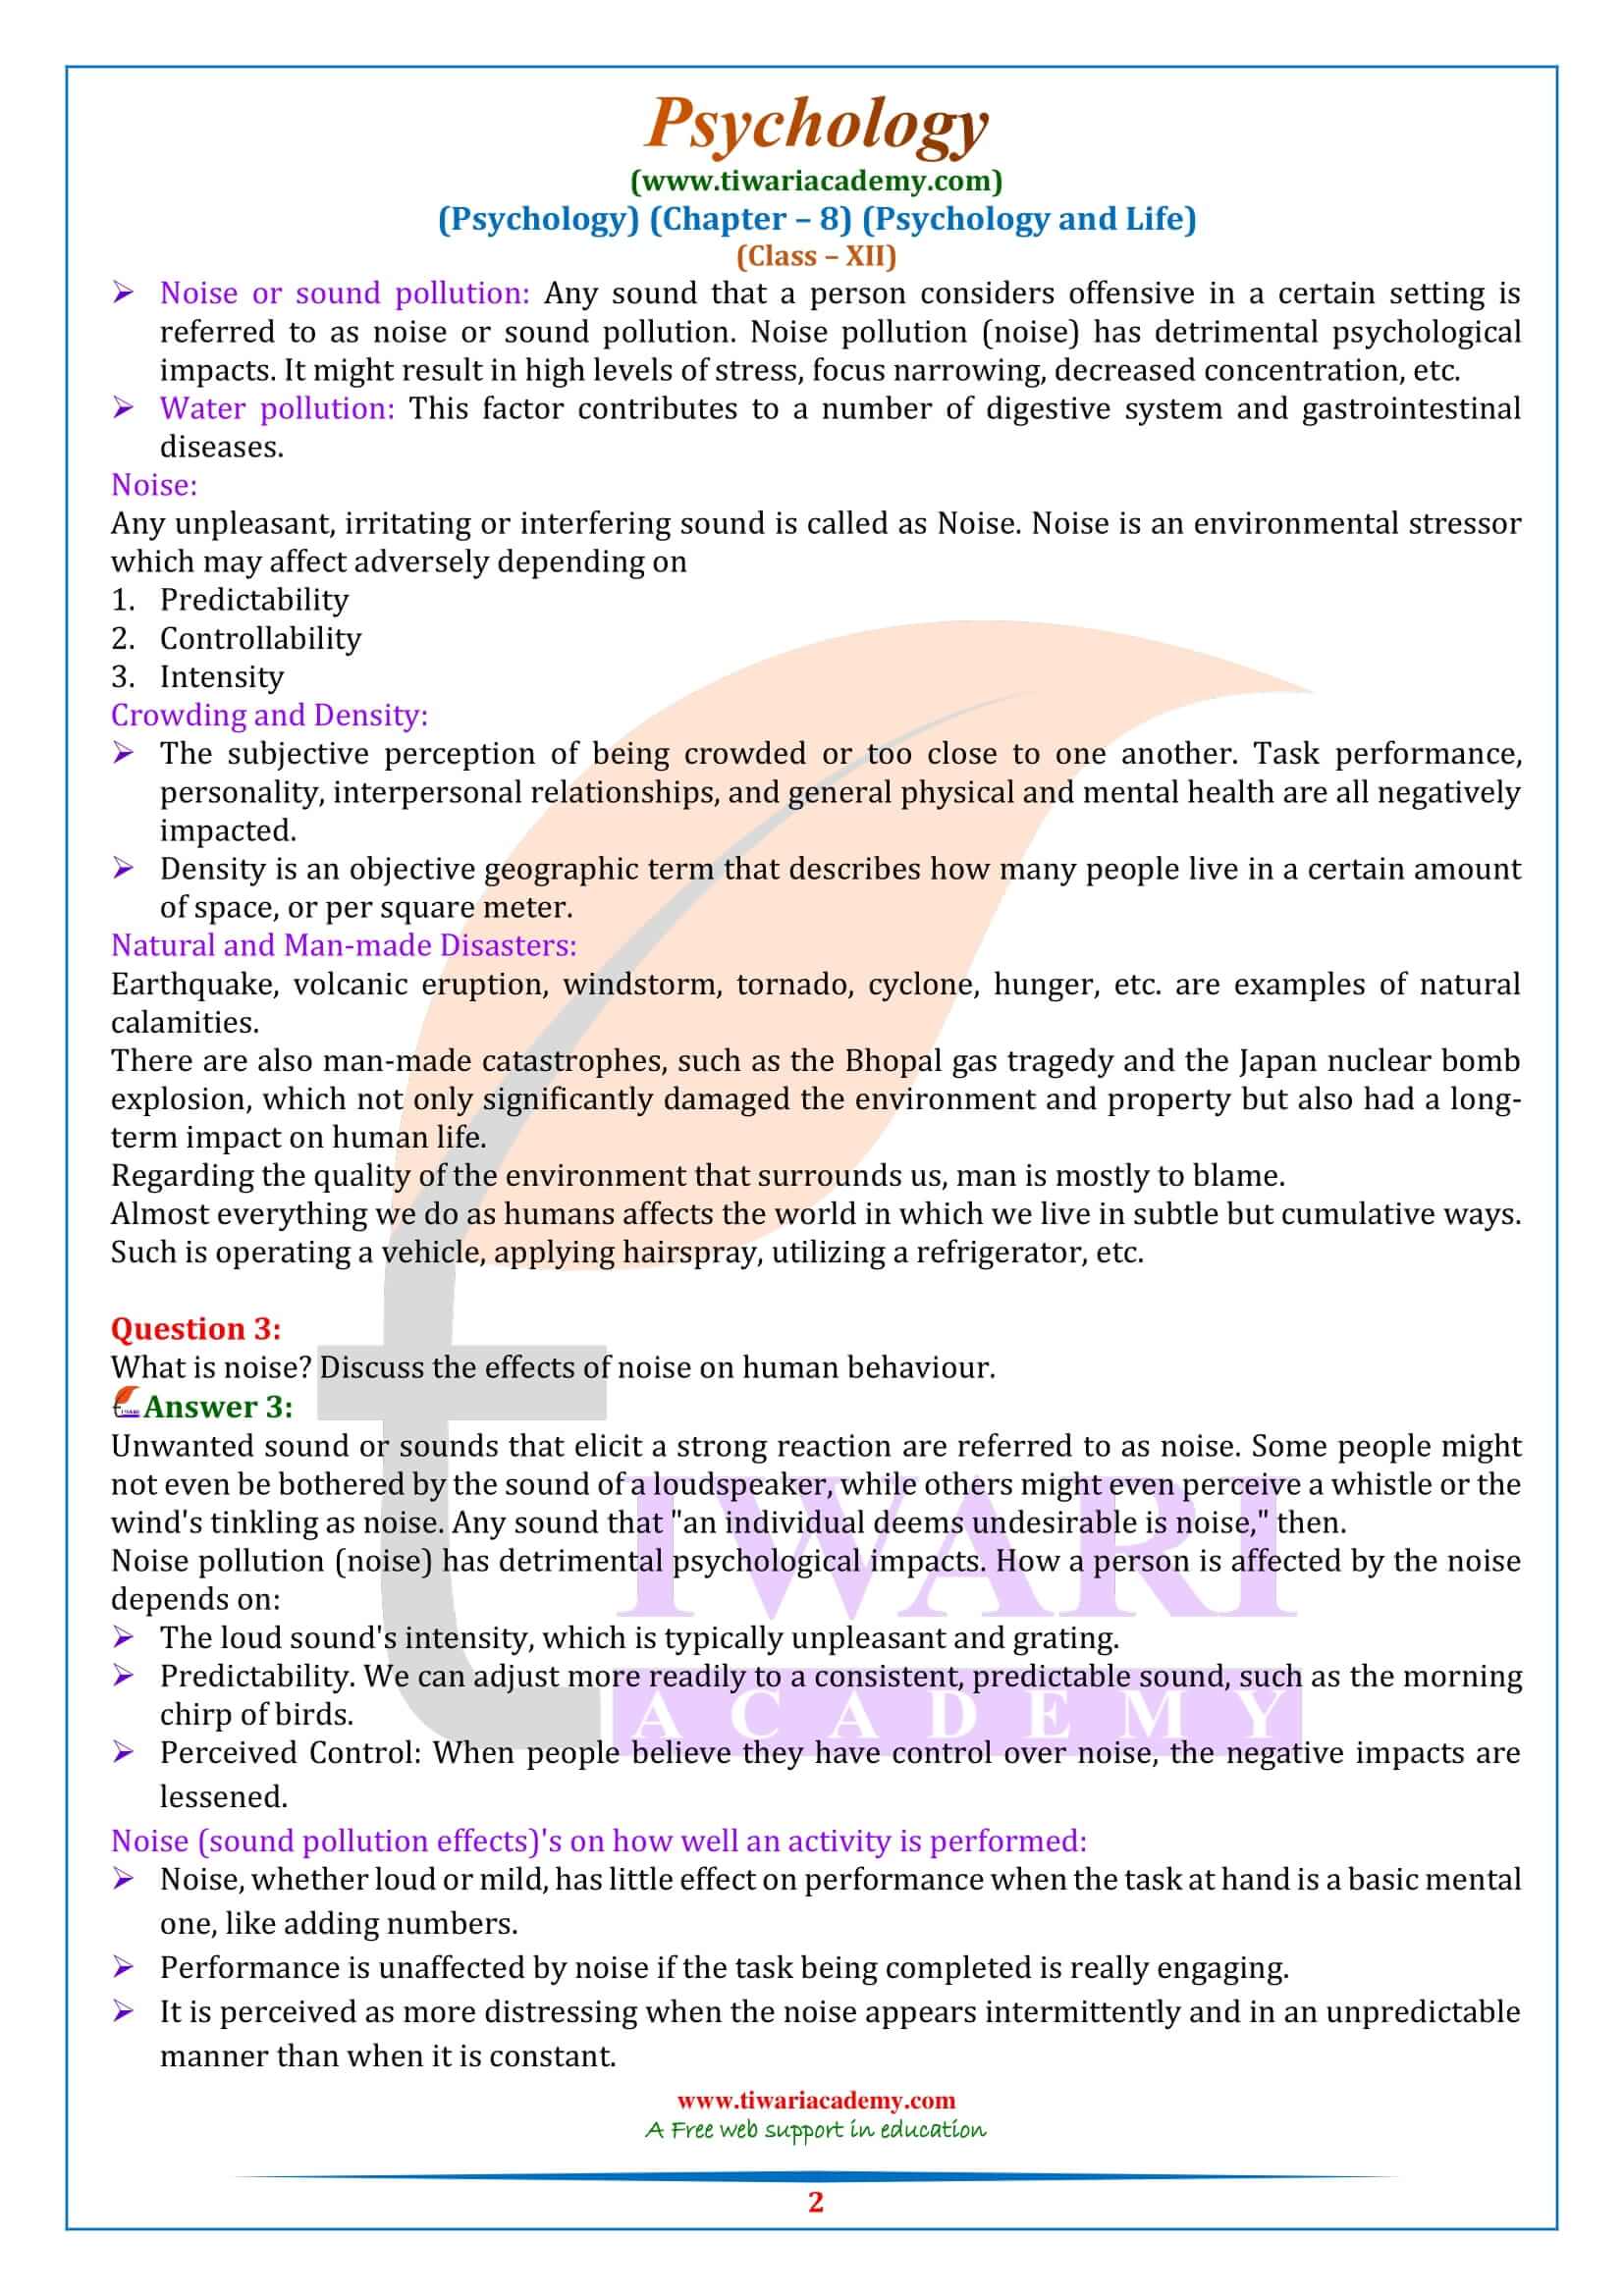 NCERT Solutions for Class 12 Psychology Chapter 8